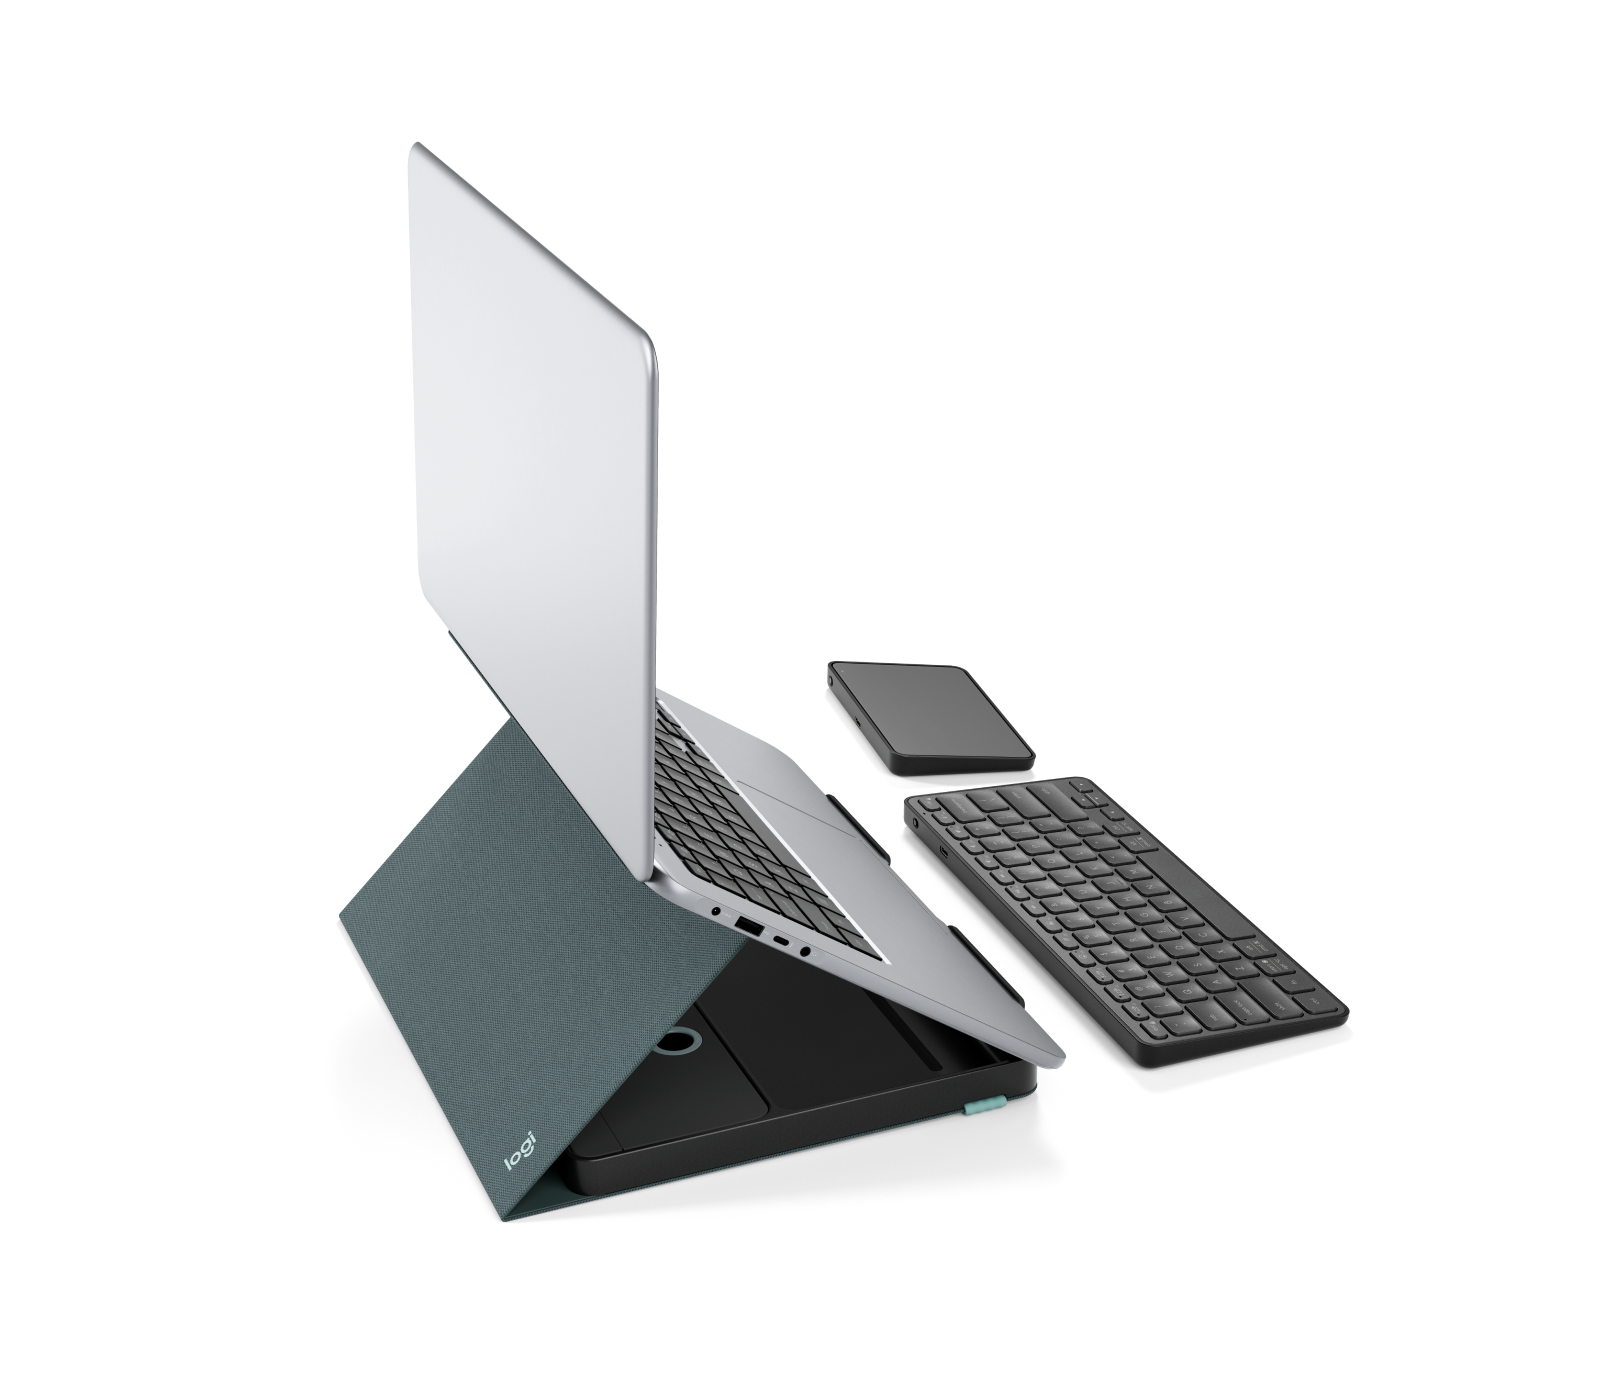 Image of CASA POP-UP DESK Foldaway kit with laptop stand, keyboard, touchpad and storage. - Classic Chic English